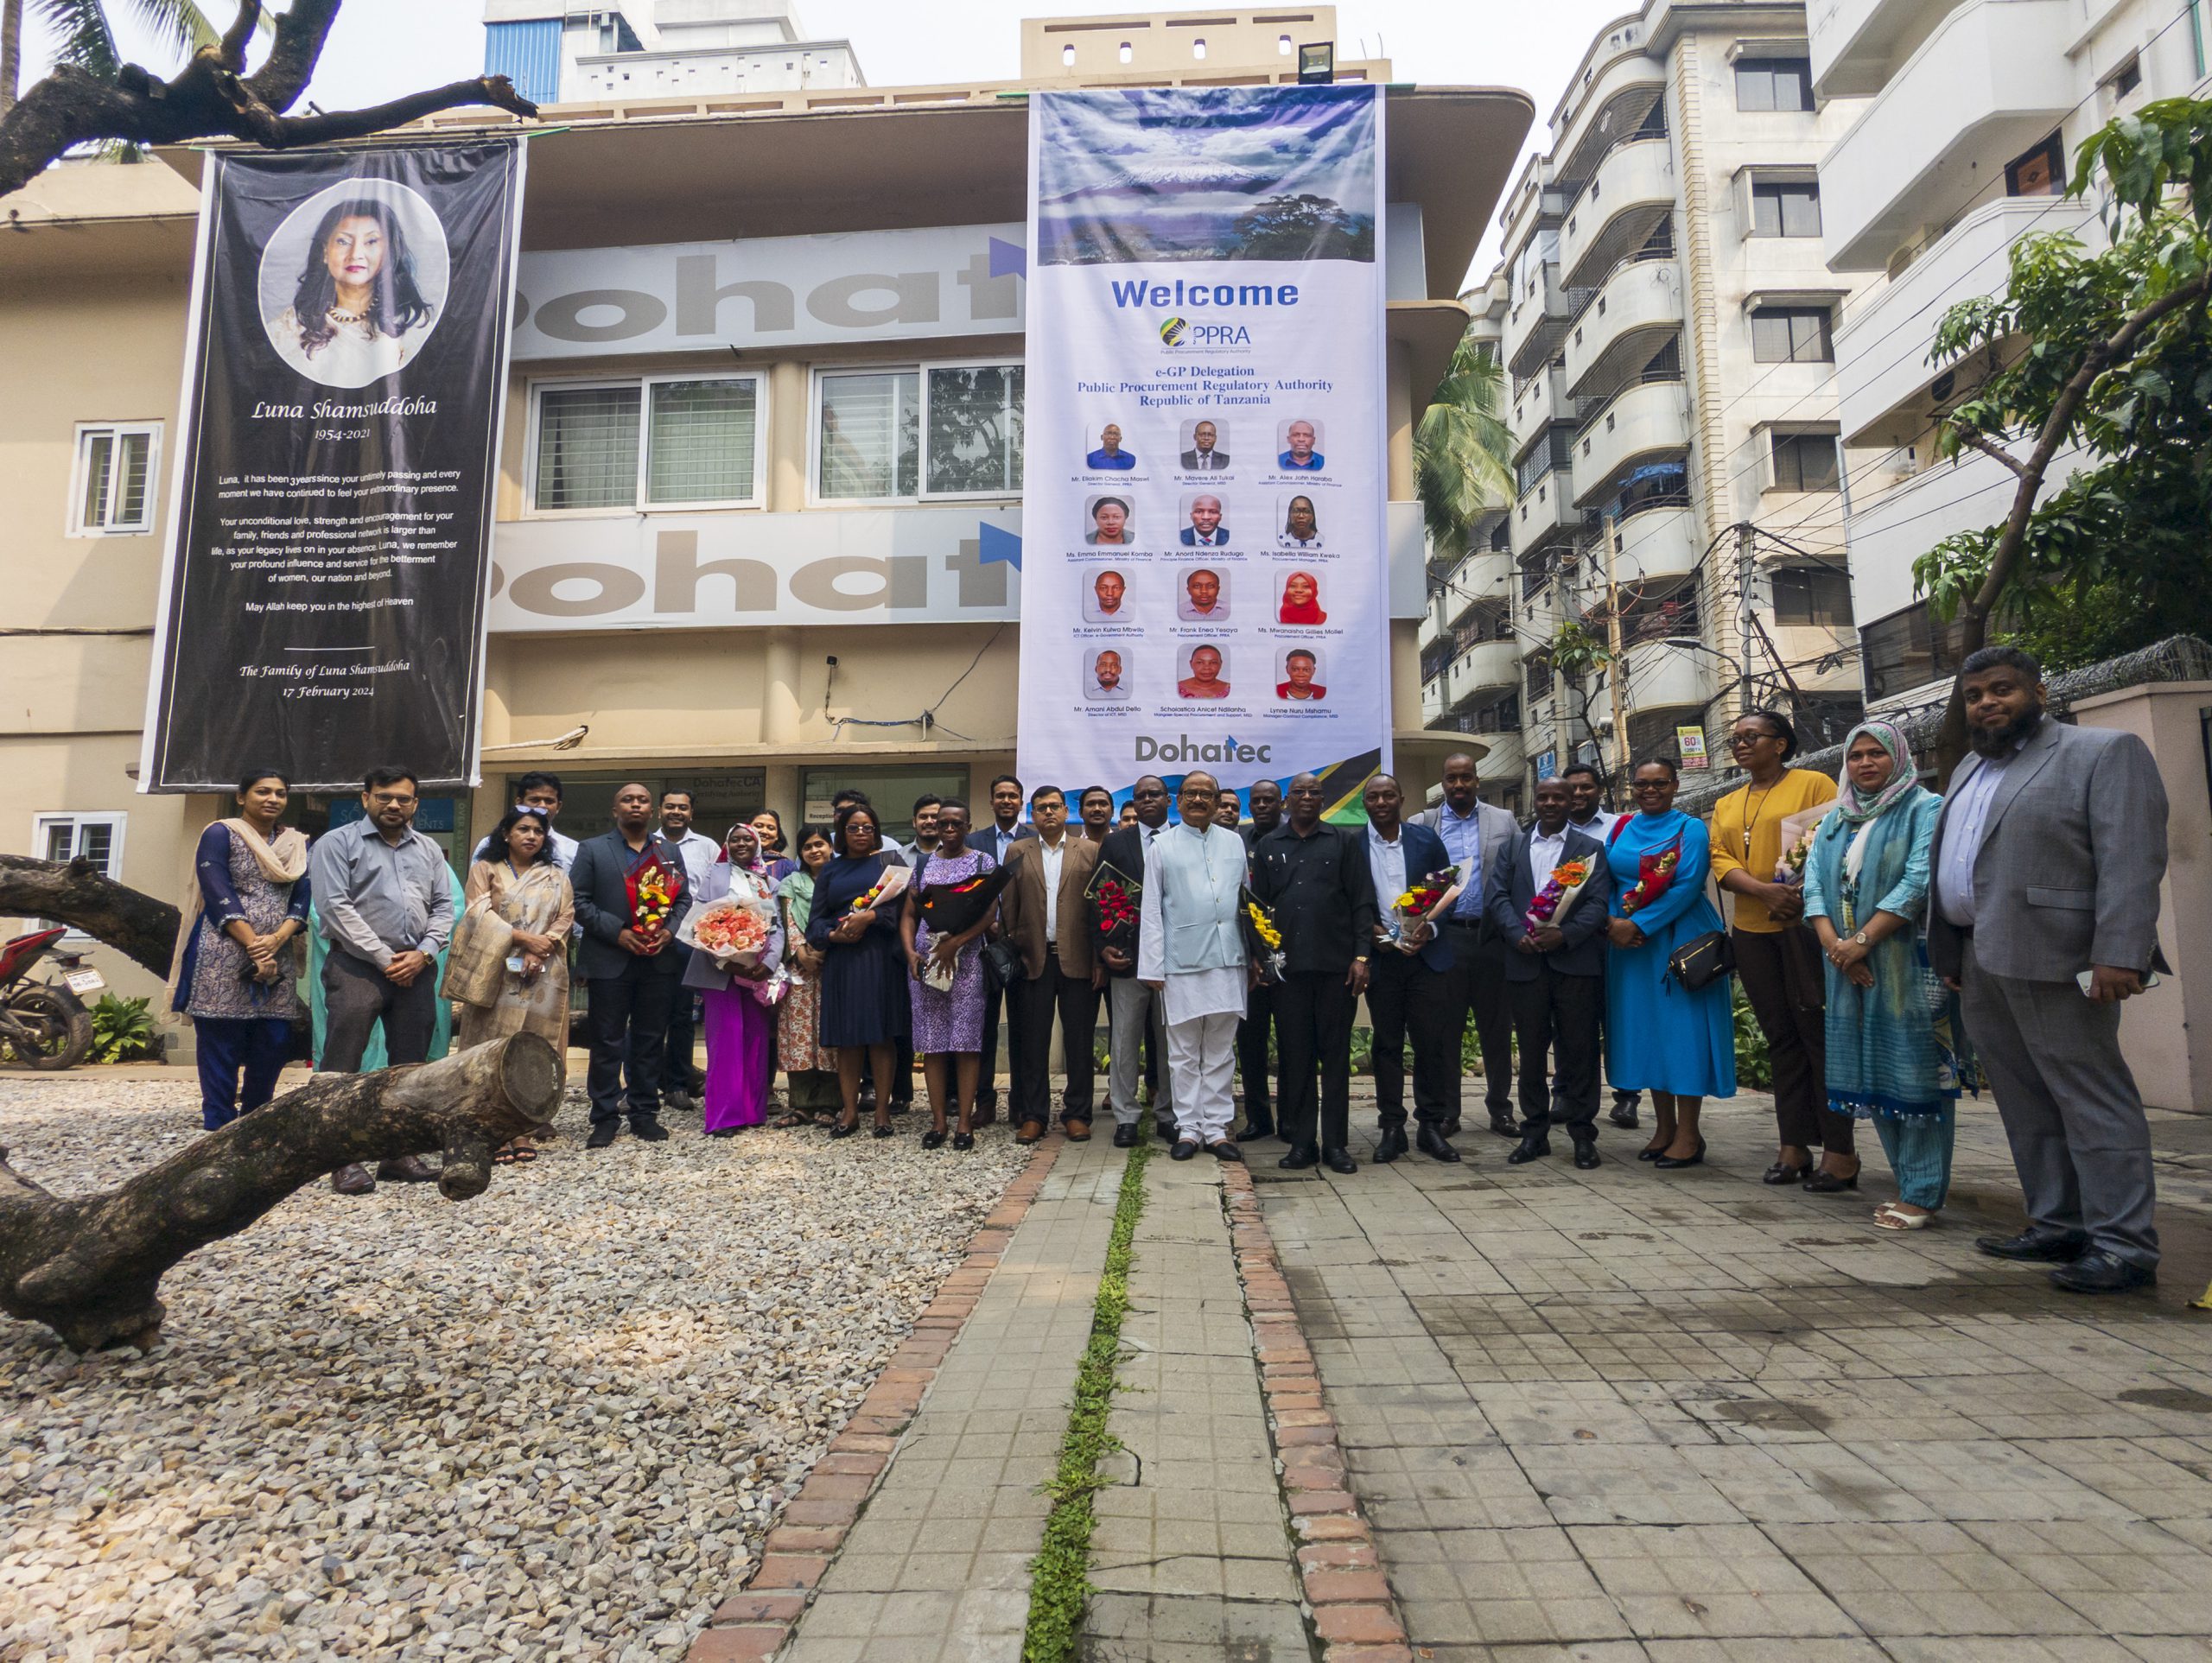 Dohatec Employees and the Tanzanian Delegates standing together in front of Dohatec HQ in Paltan